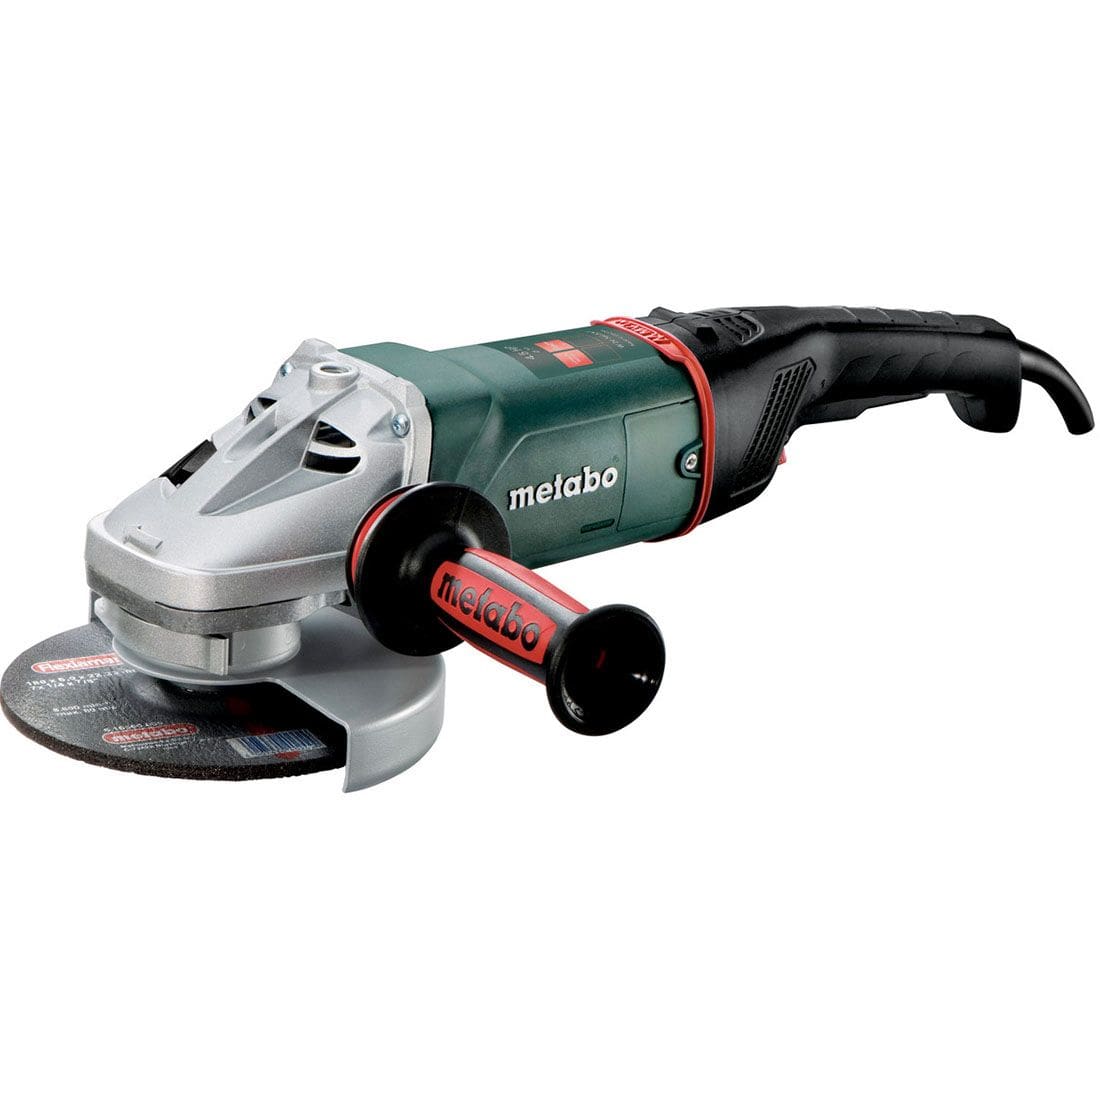 W24-230-S 7 in. Variable Speed Angle Grinder - Xtreme Polishing Systems, hand held grinder for concrete, variable speed grinders, variable speed angle grinders, 7 inch metabo grinder, 7 inch grinder, angle grinder 7 inch, metabo grinders, metabo angle grinder